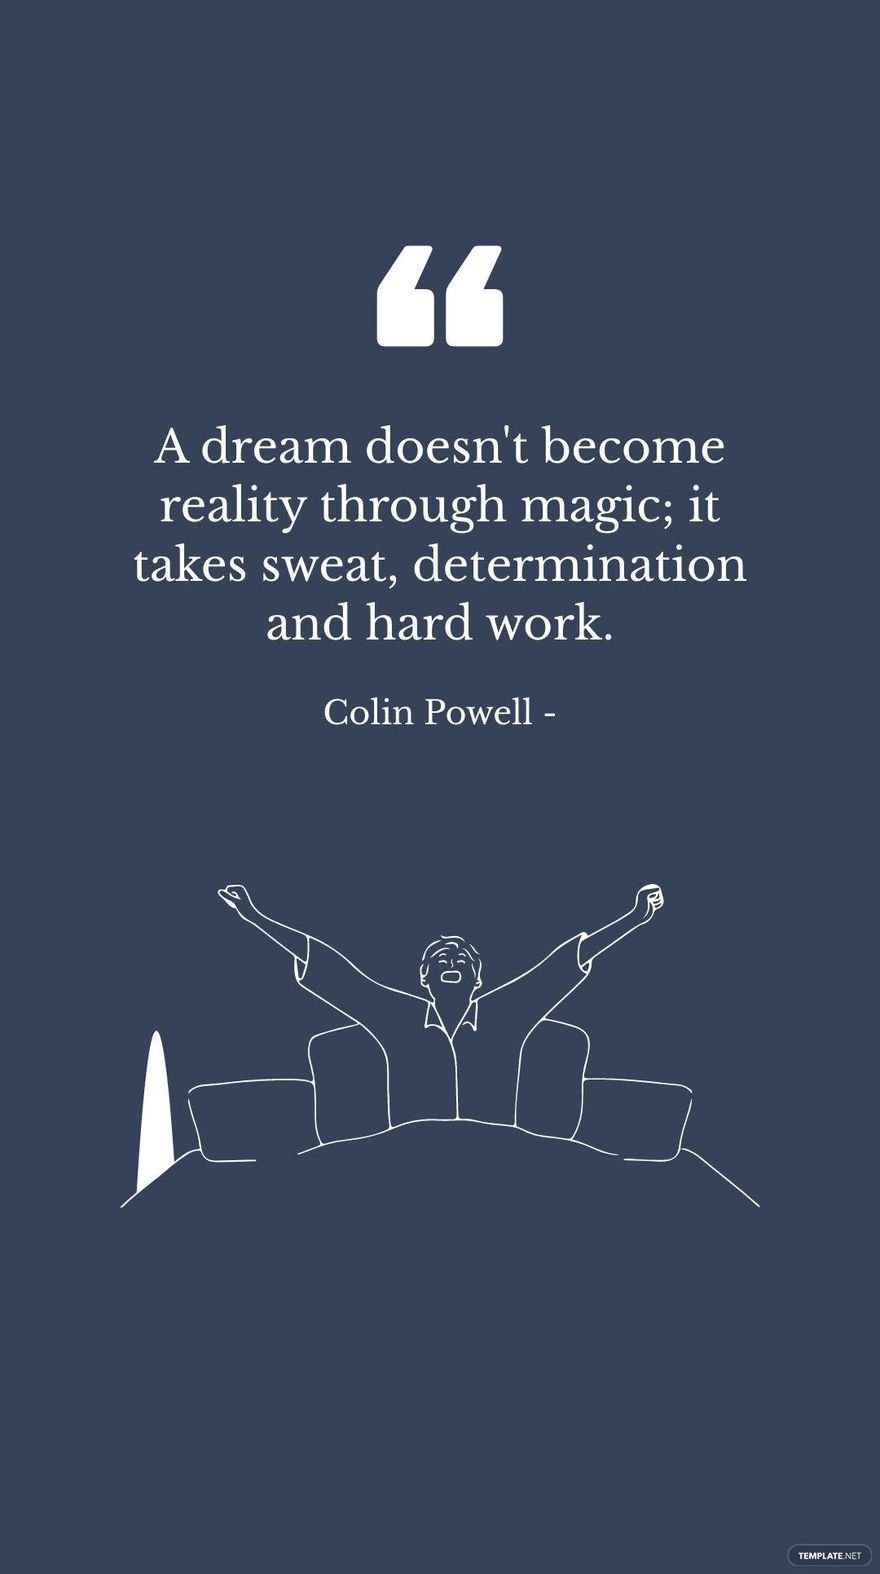 Colin Powell - A dream doesn't become reality through magic; it takes sweat, determination and hard work. in JPG